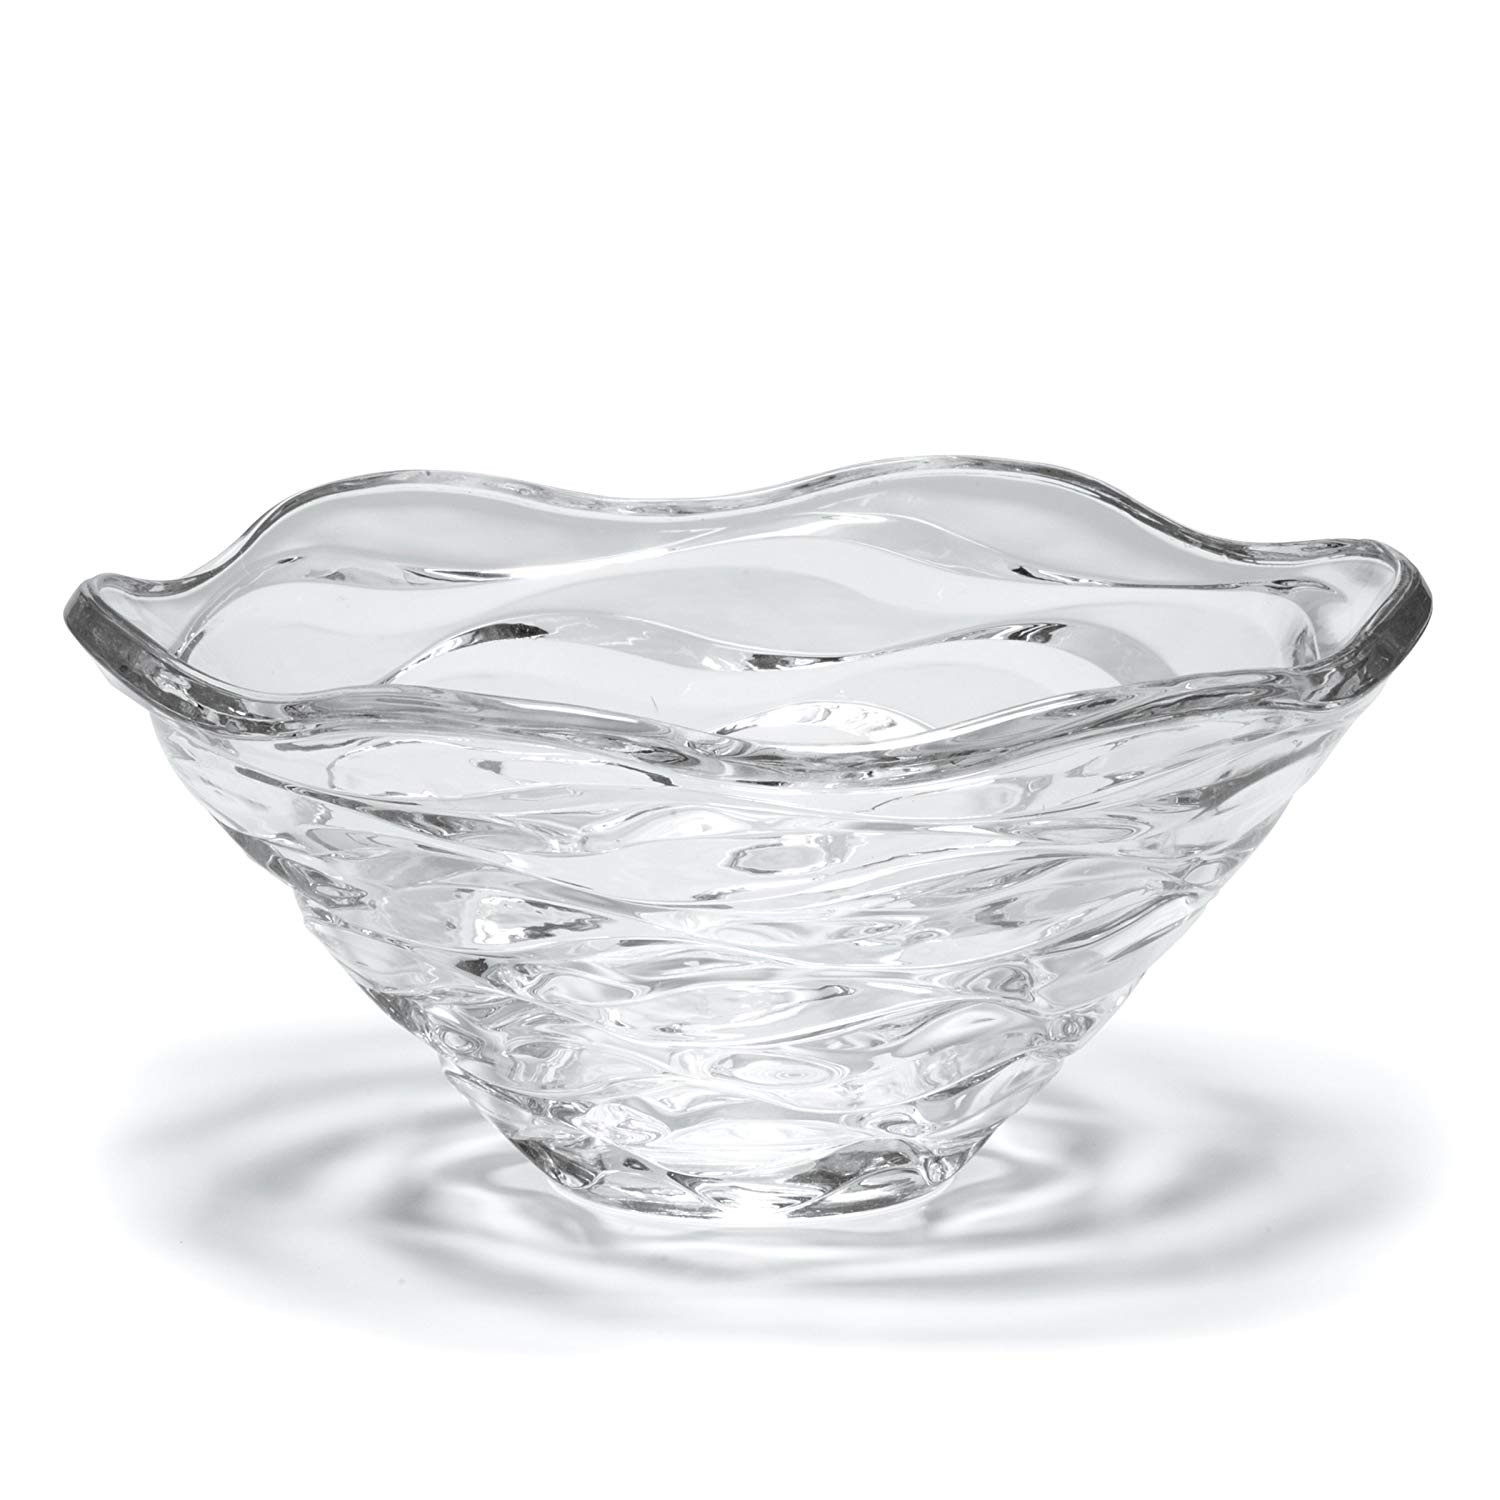 20 attractive Mikasa Florale Crystal Vase 2022 free download mikasa florale crystal vase of amazon com mikasa atlantic crystal decorative bowl 11 5 inch for amazon com mikasa atlantic crystal decorative bowl 11 5 inch centerpiece bowls kitchen dining